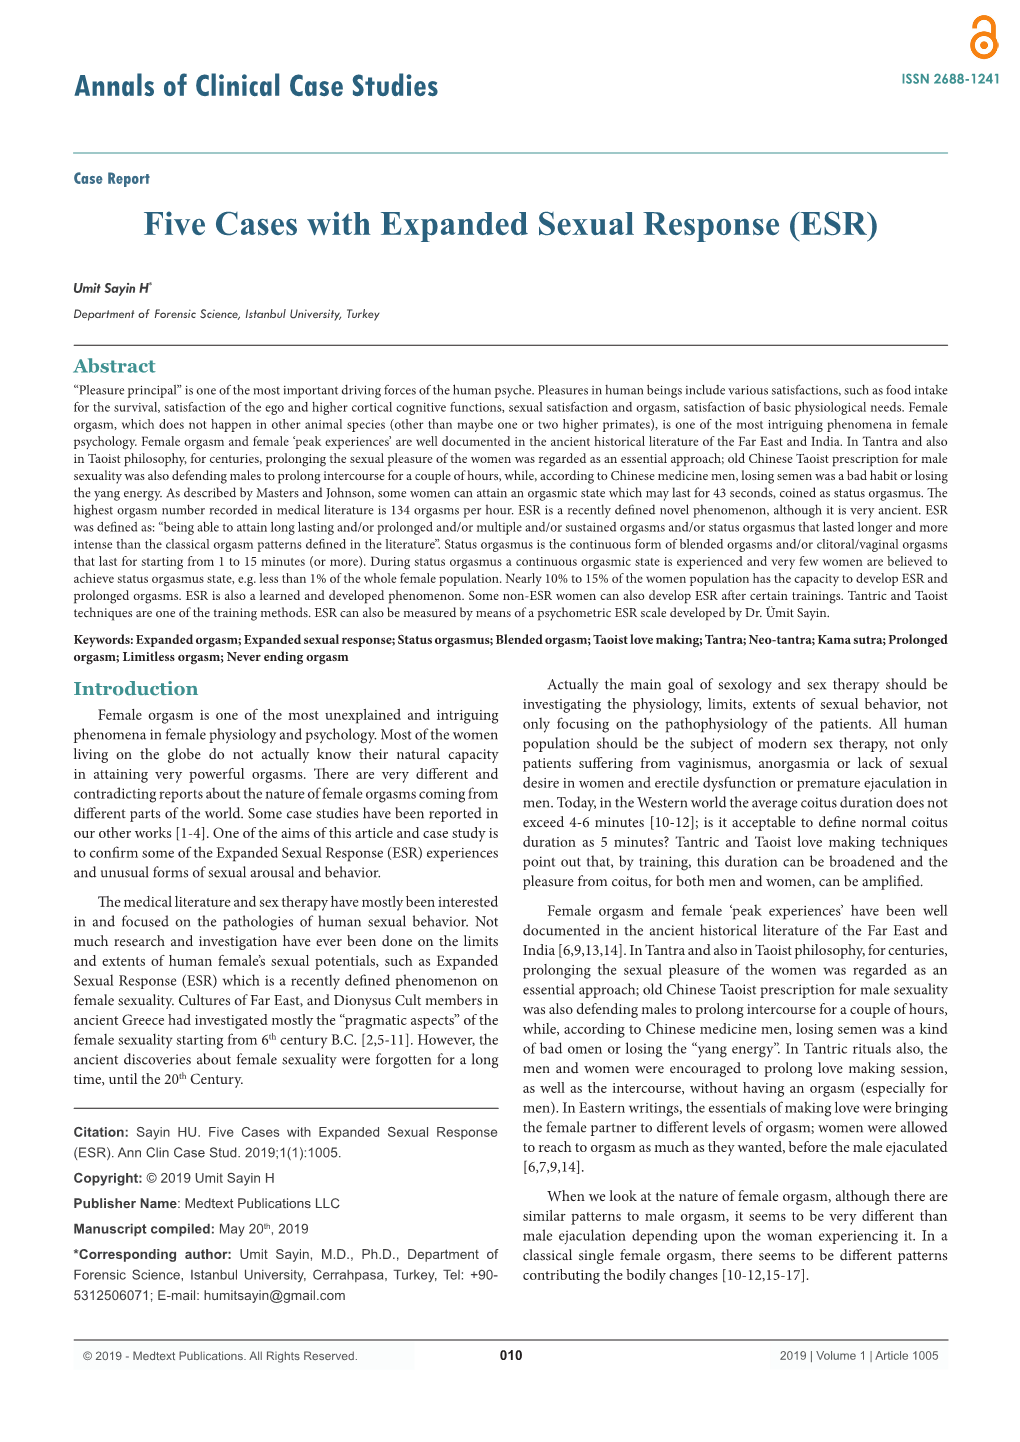 Five Cases with Expanded Sexual Response (ESR)